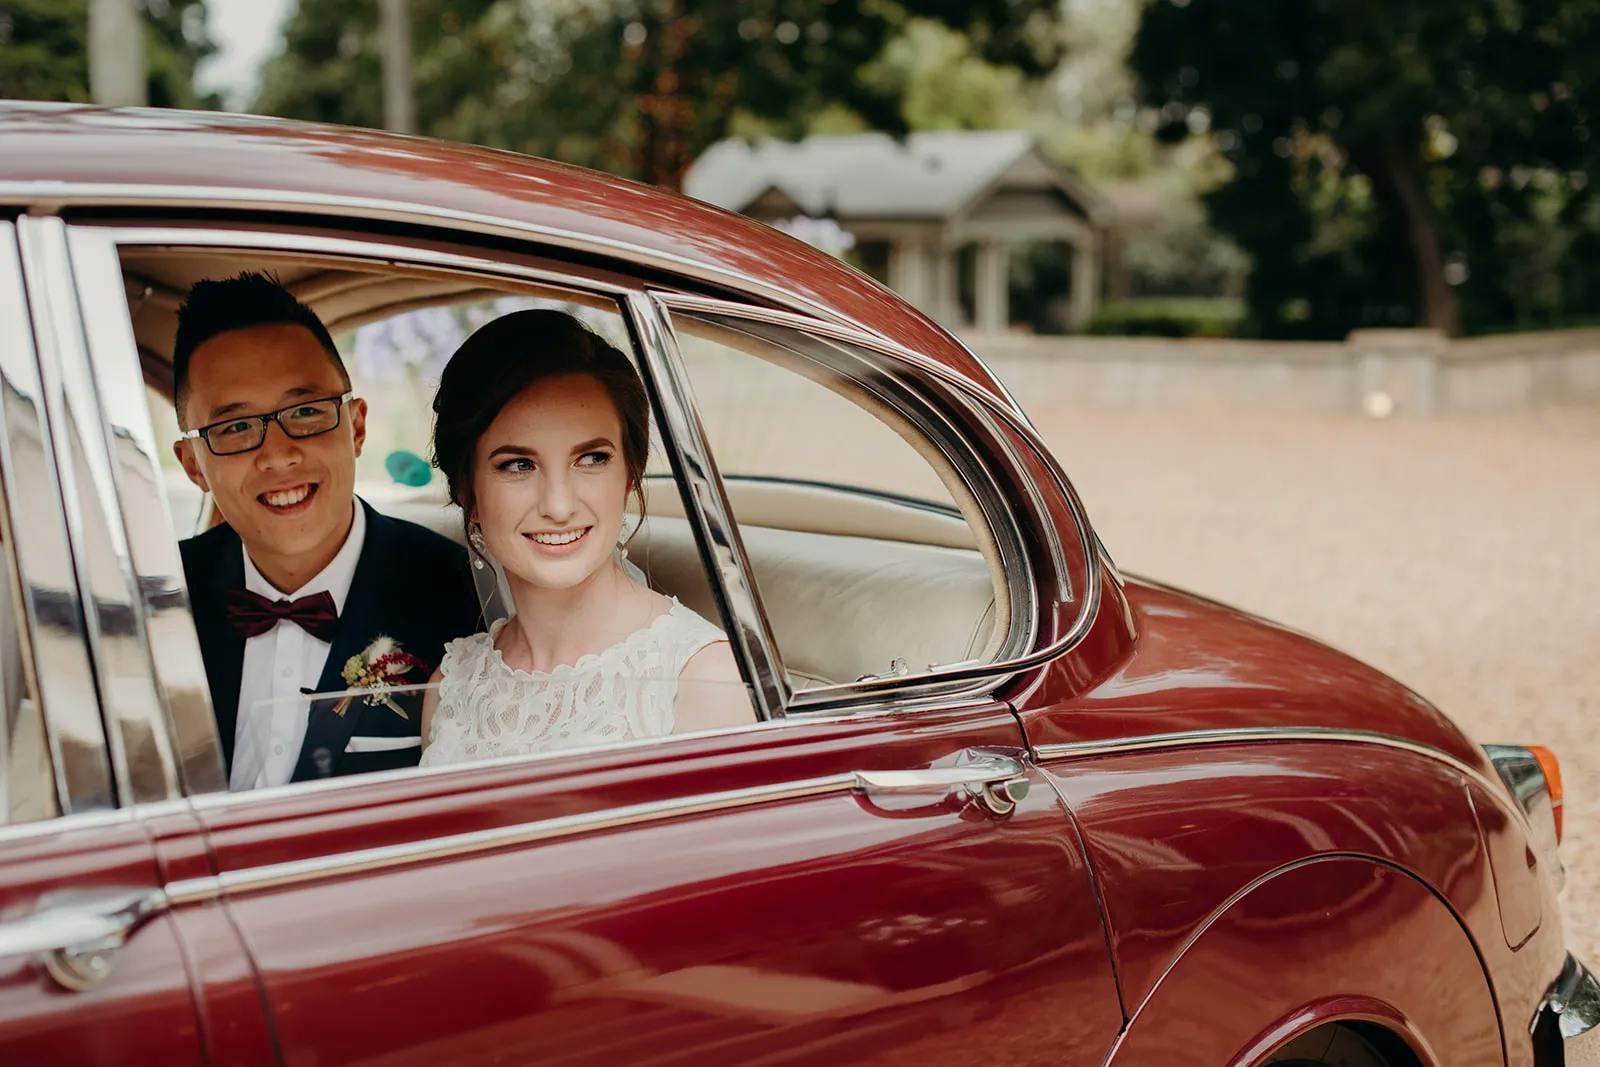 A smiling bride, wearing a white lace wedding dress, and a smiling groom, dressed in a tuxedo with a boutonniere, are sitting in the backseat of a vintage red car with the windows rolled down. They appear happy and excited, looking out the window. The background is an outdoor setting with trees and a building.